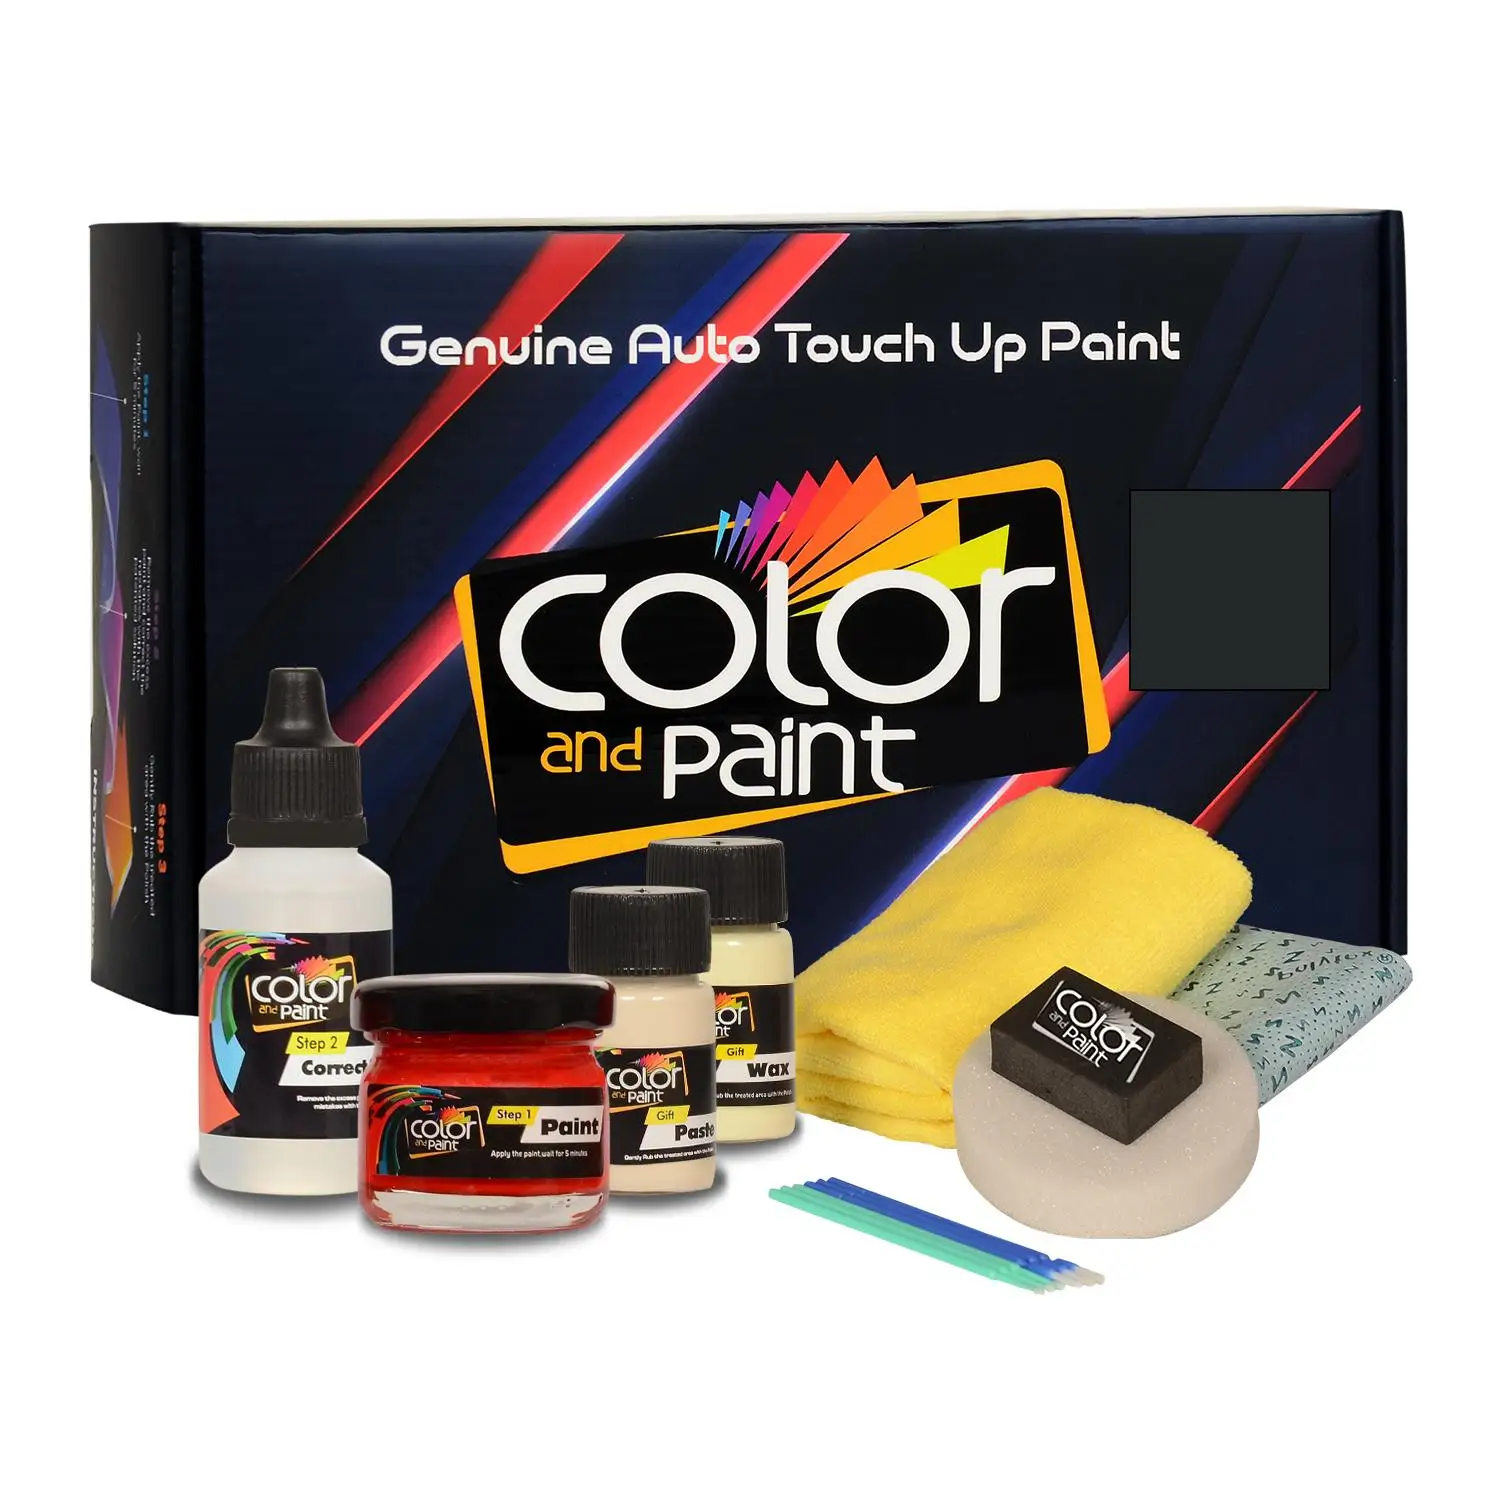 

Color and Paint compatible with Opel Automotive Touch Up Paint - KOSMOSSCHWARZ MET - GAB - Basic Care